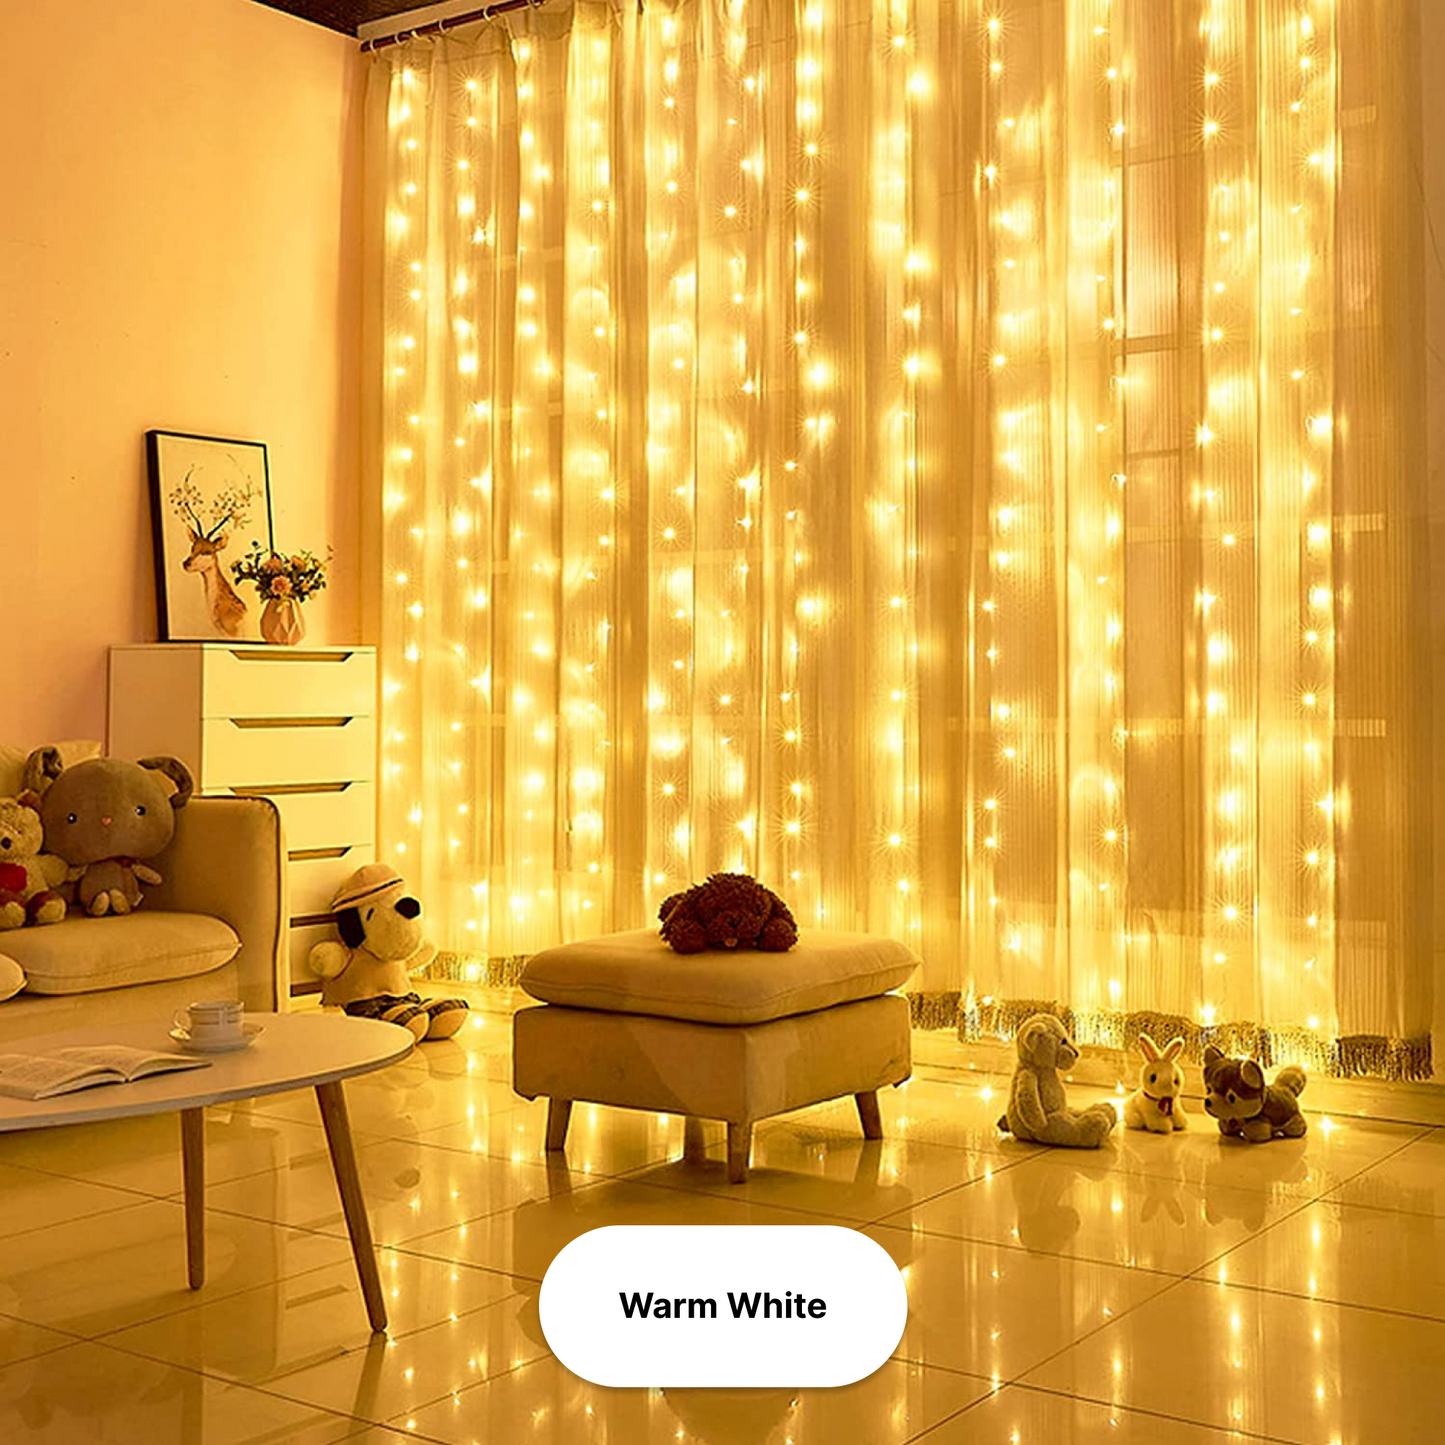 J - Window Curtain String 300 LED Light 3x3M for Outdoor Home Decoration with Remote Controller